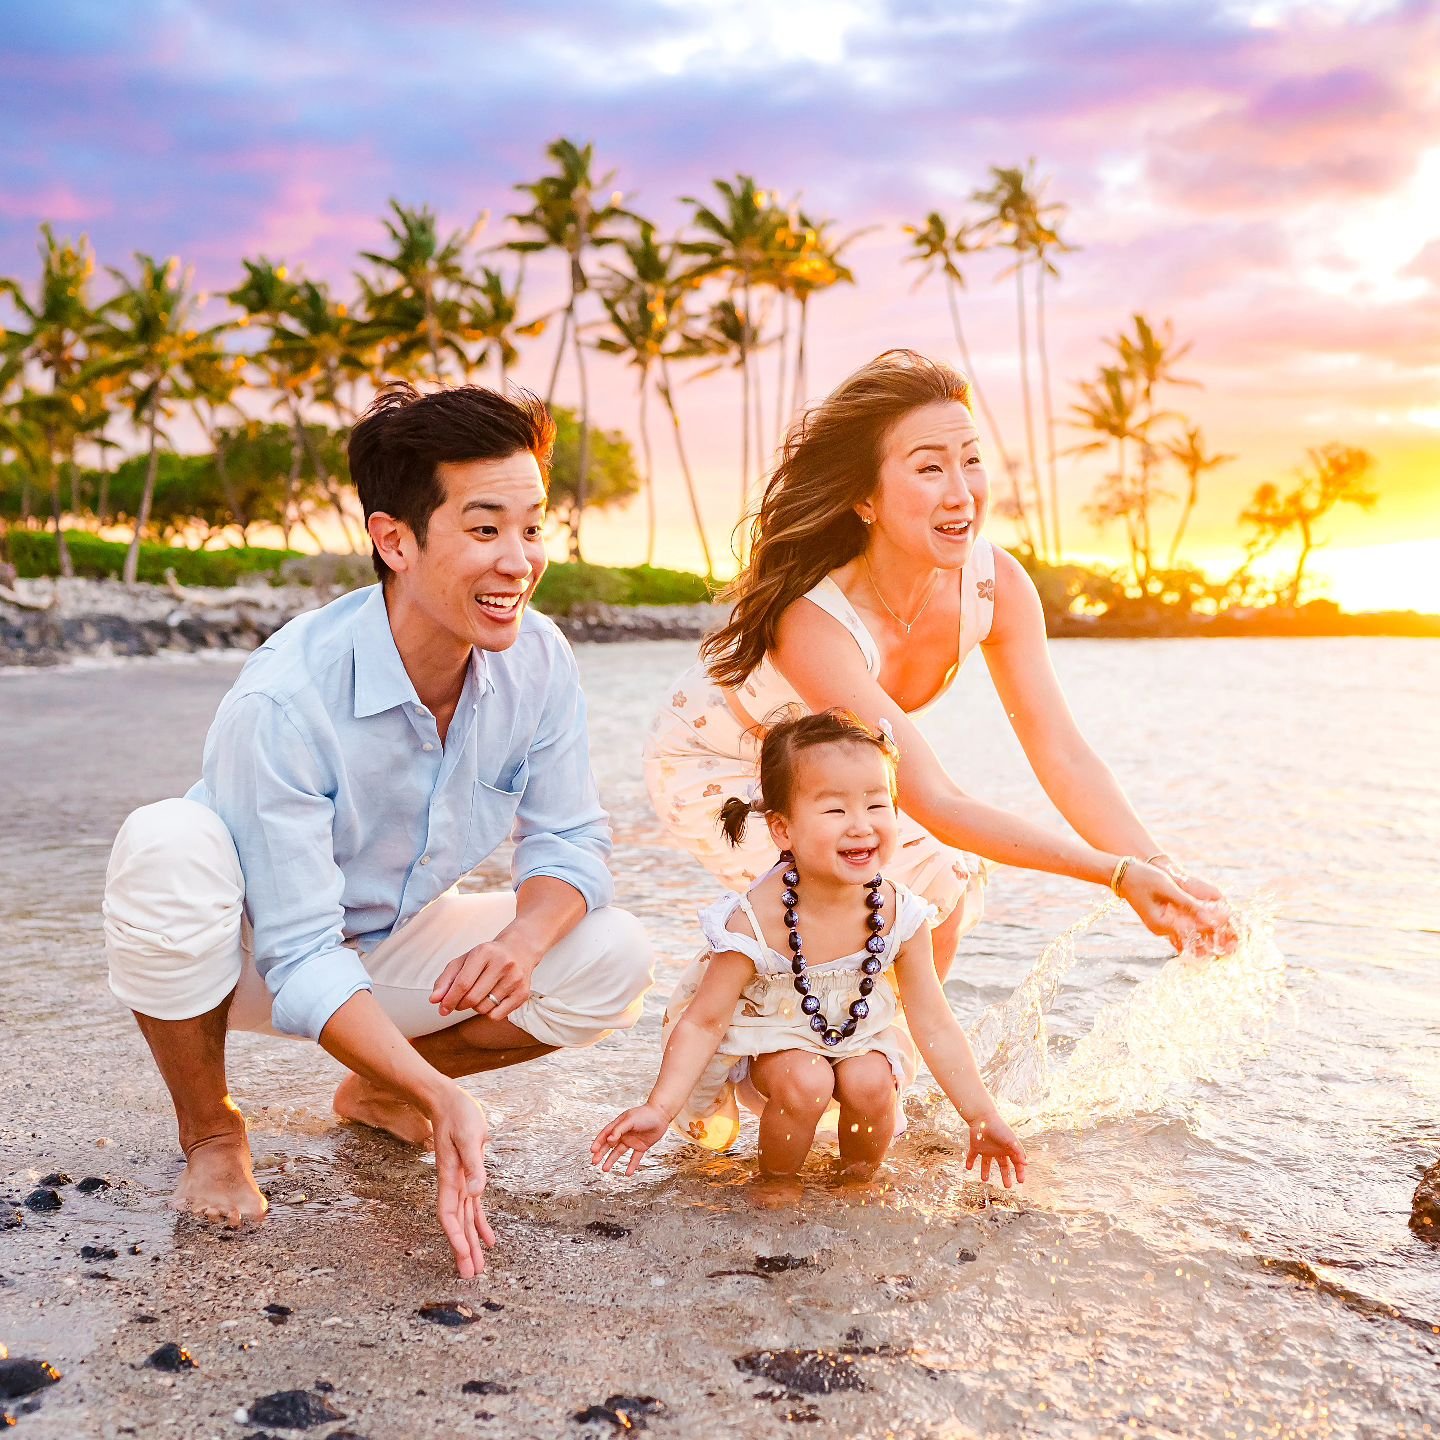 &quot;Our experience with Photographers in Hawaii for our family shoot on Big Island was nothing short of magical.

Marissa, our dedicated photographer, transformed our family trip into a treasure trove of memories. Her skill behind the lens combined